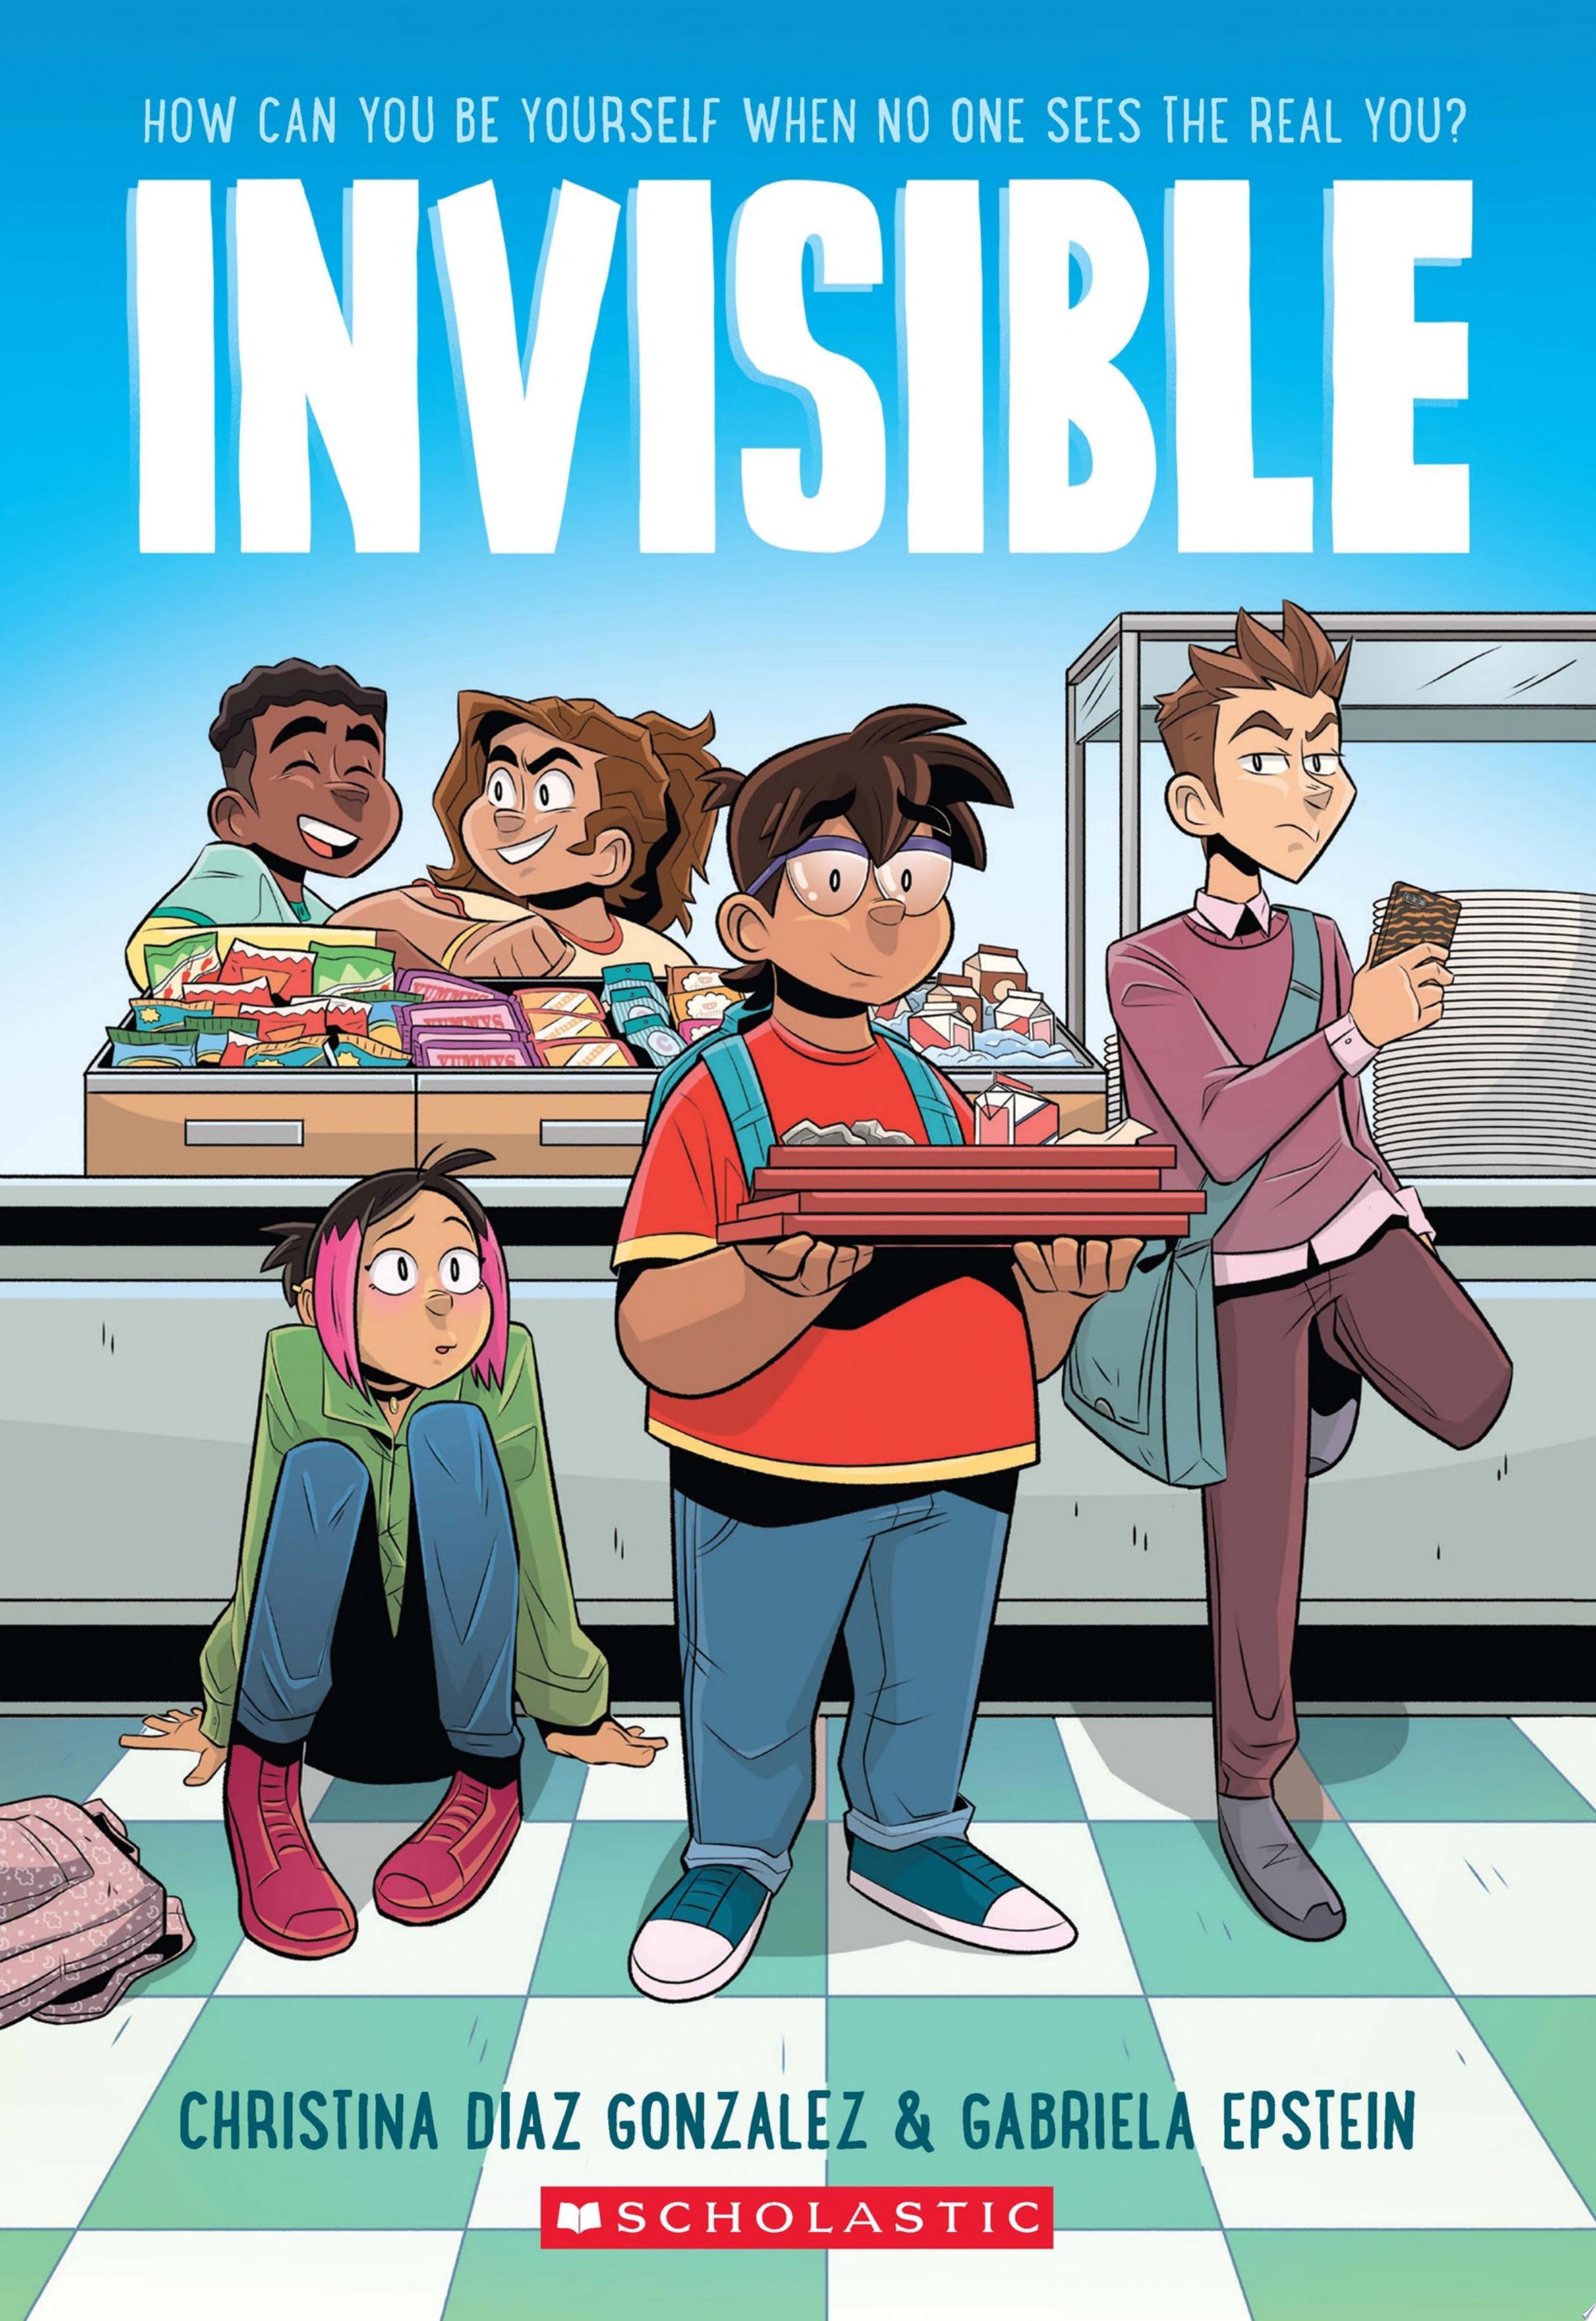 Image for "Invisible: A Graphic Novel"